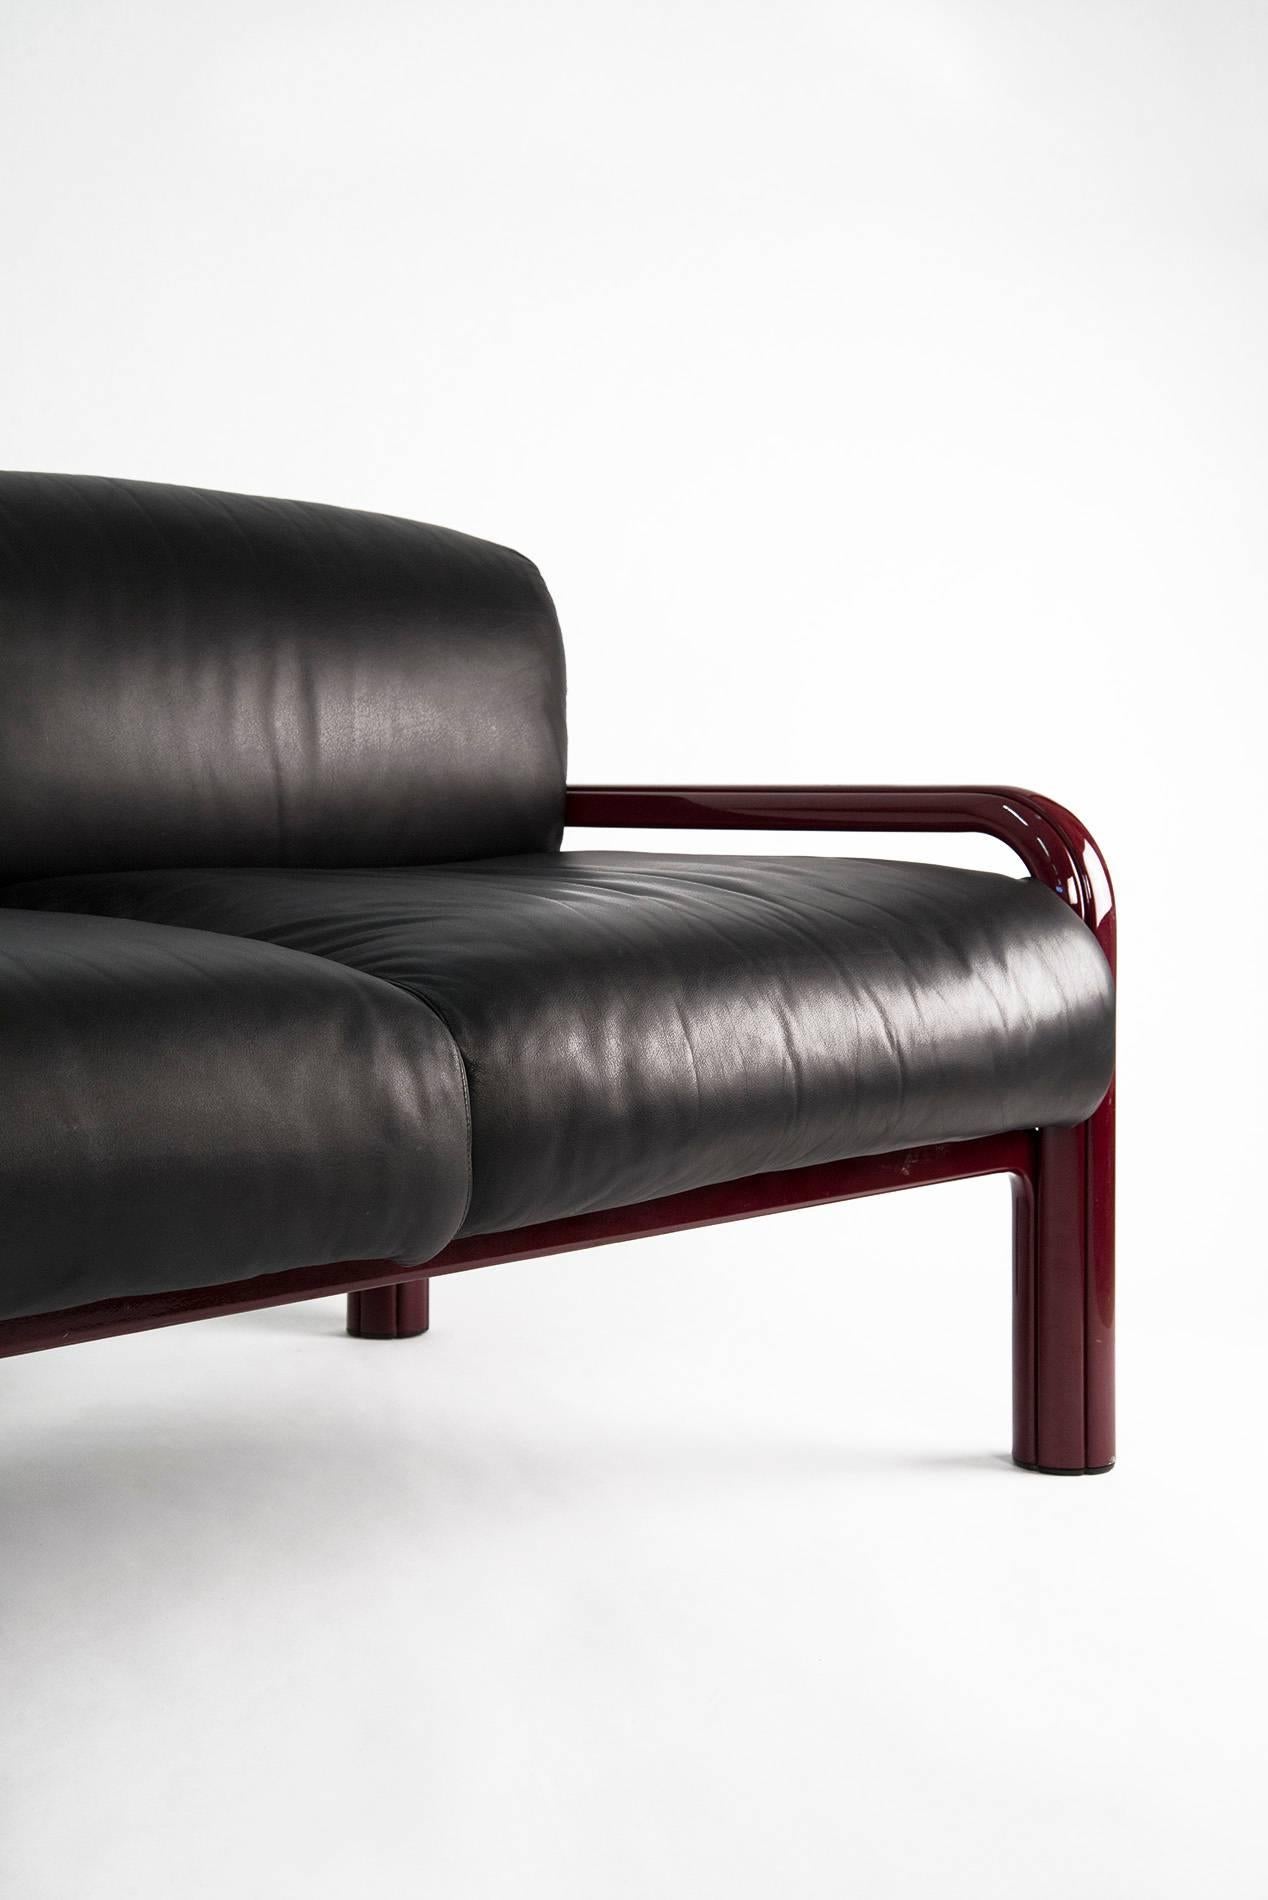 Mid-Century Modern Three-Seat Leather Sofa by Gae Aulenti for Knoll, 1976